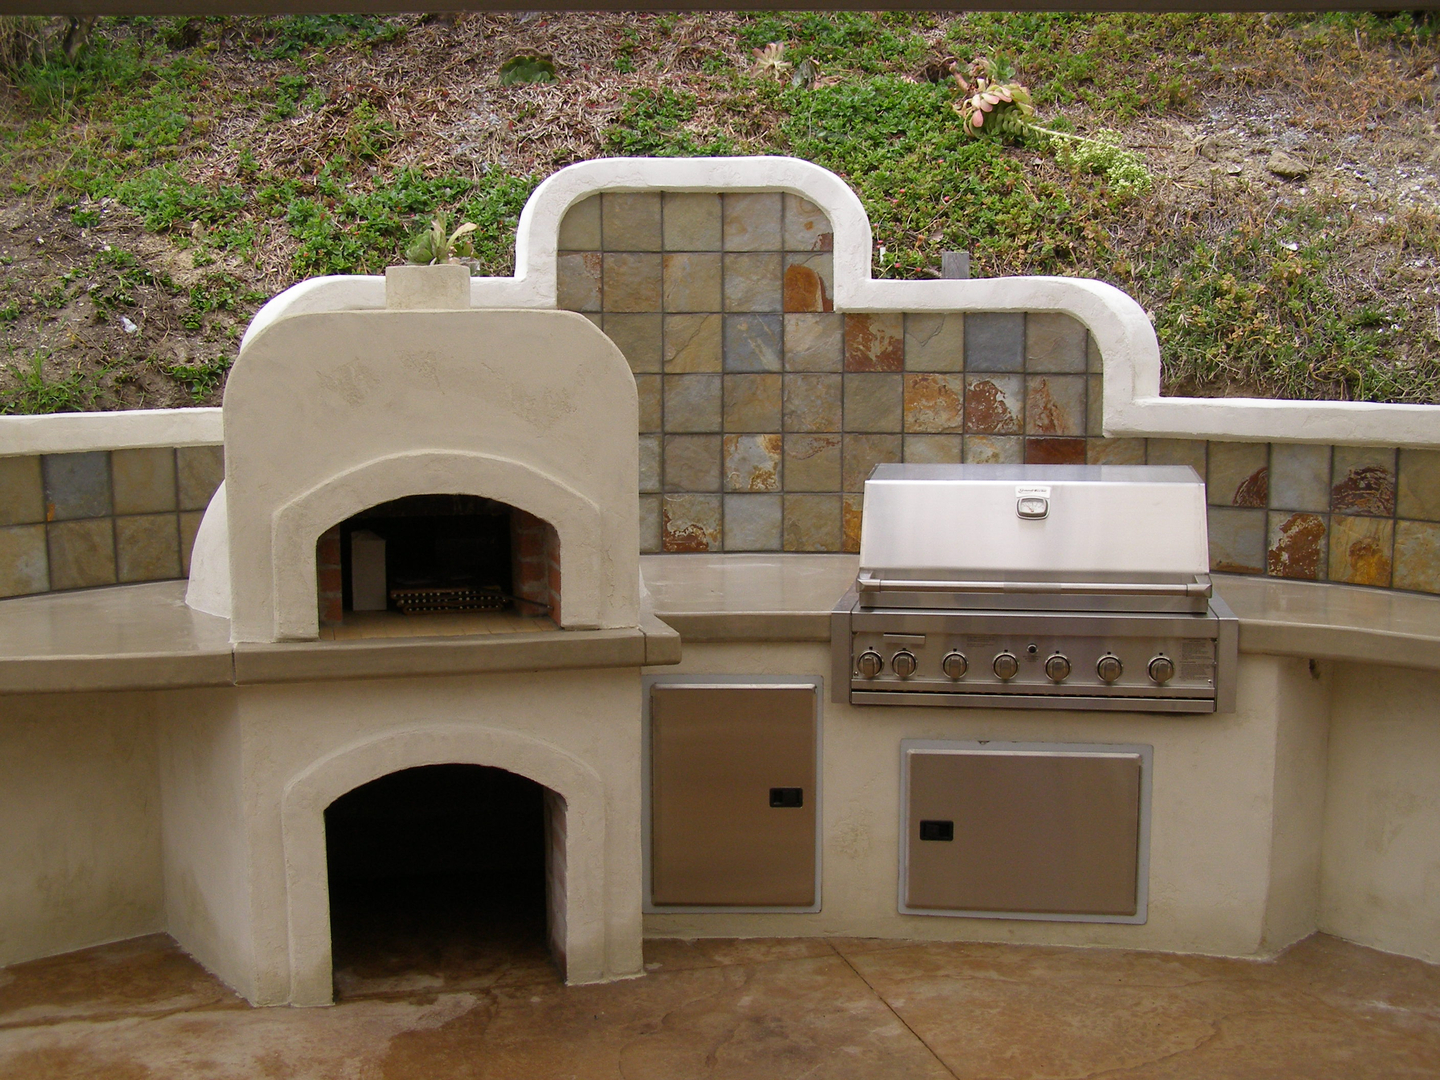 A Grill Space With Wood Oven Built